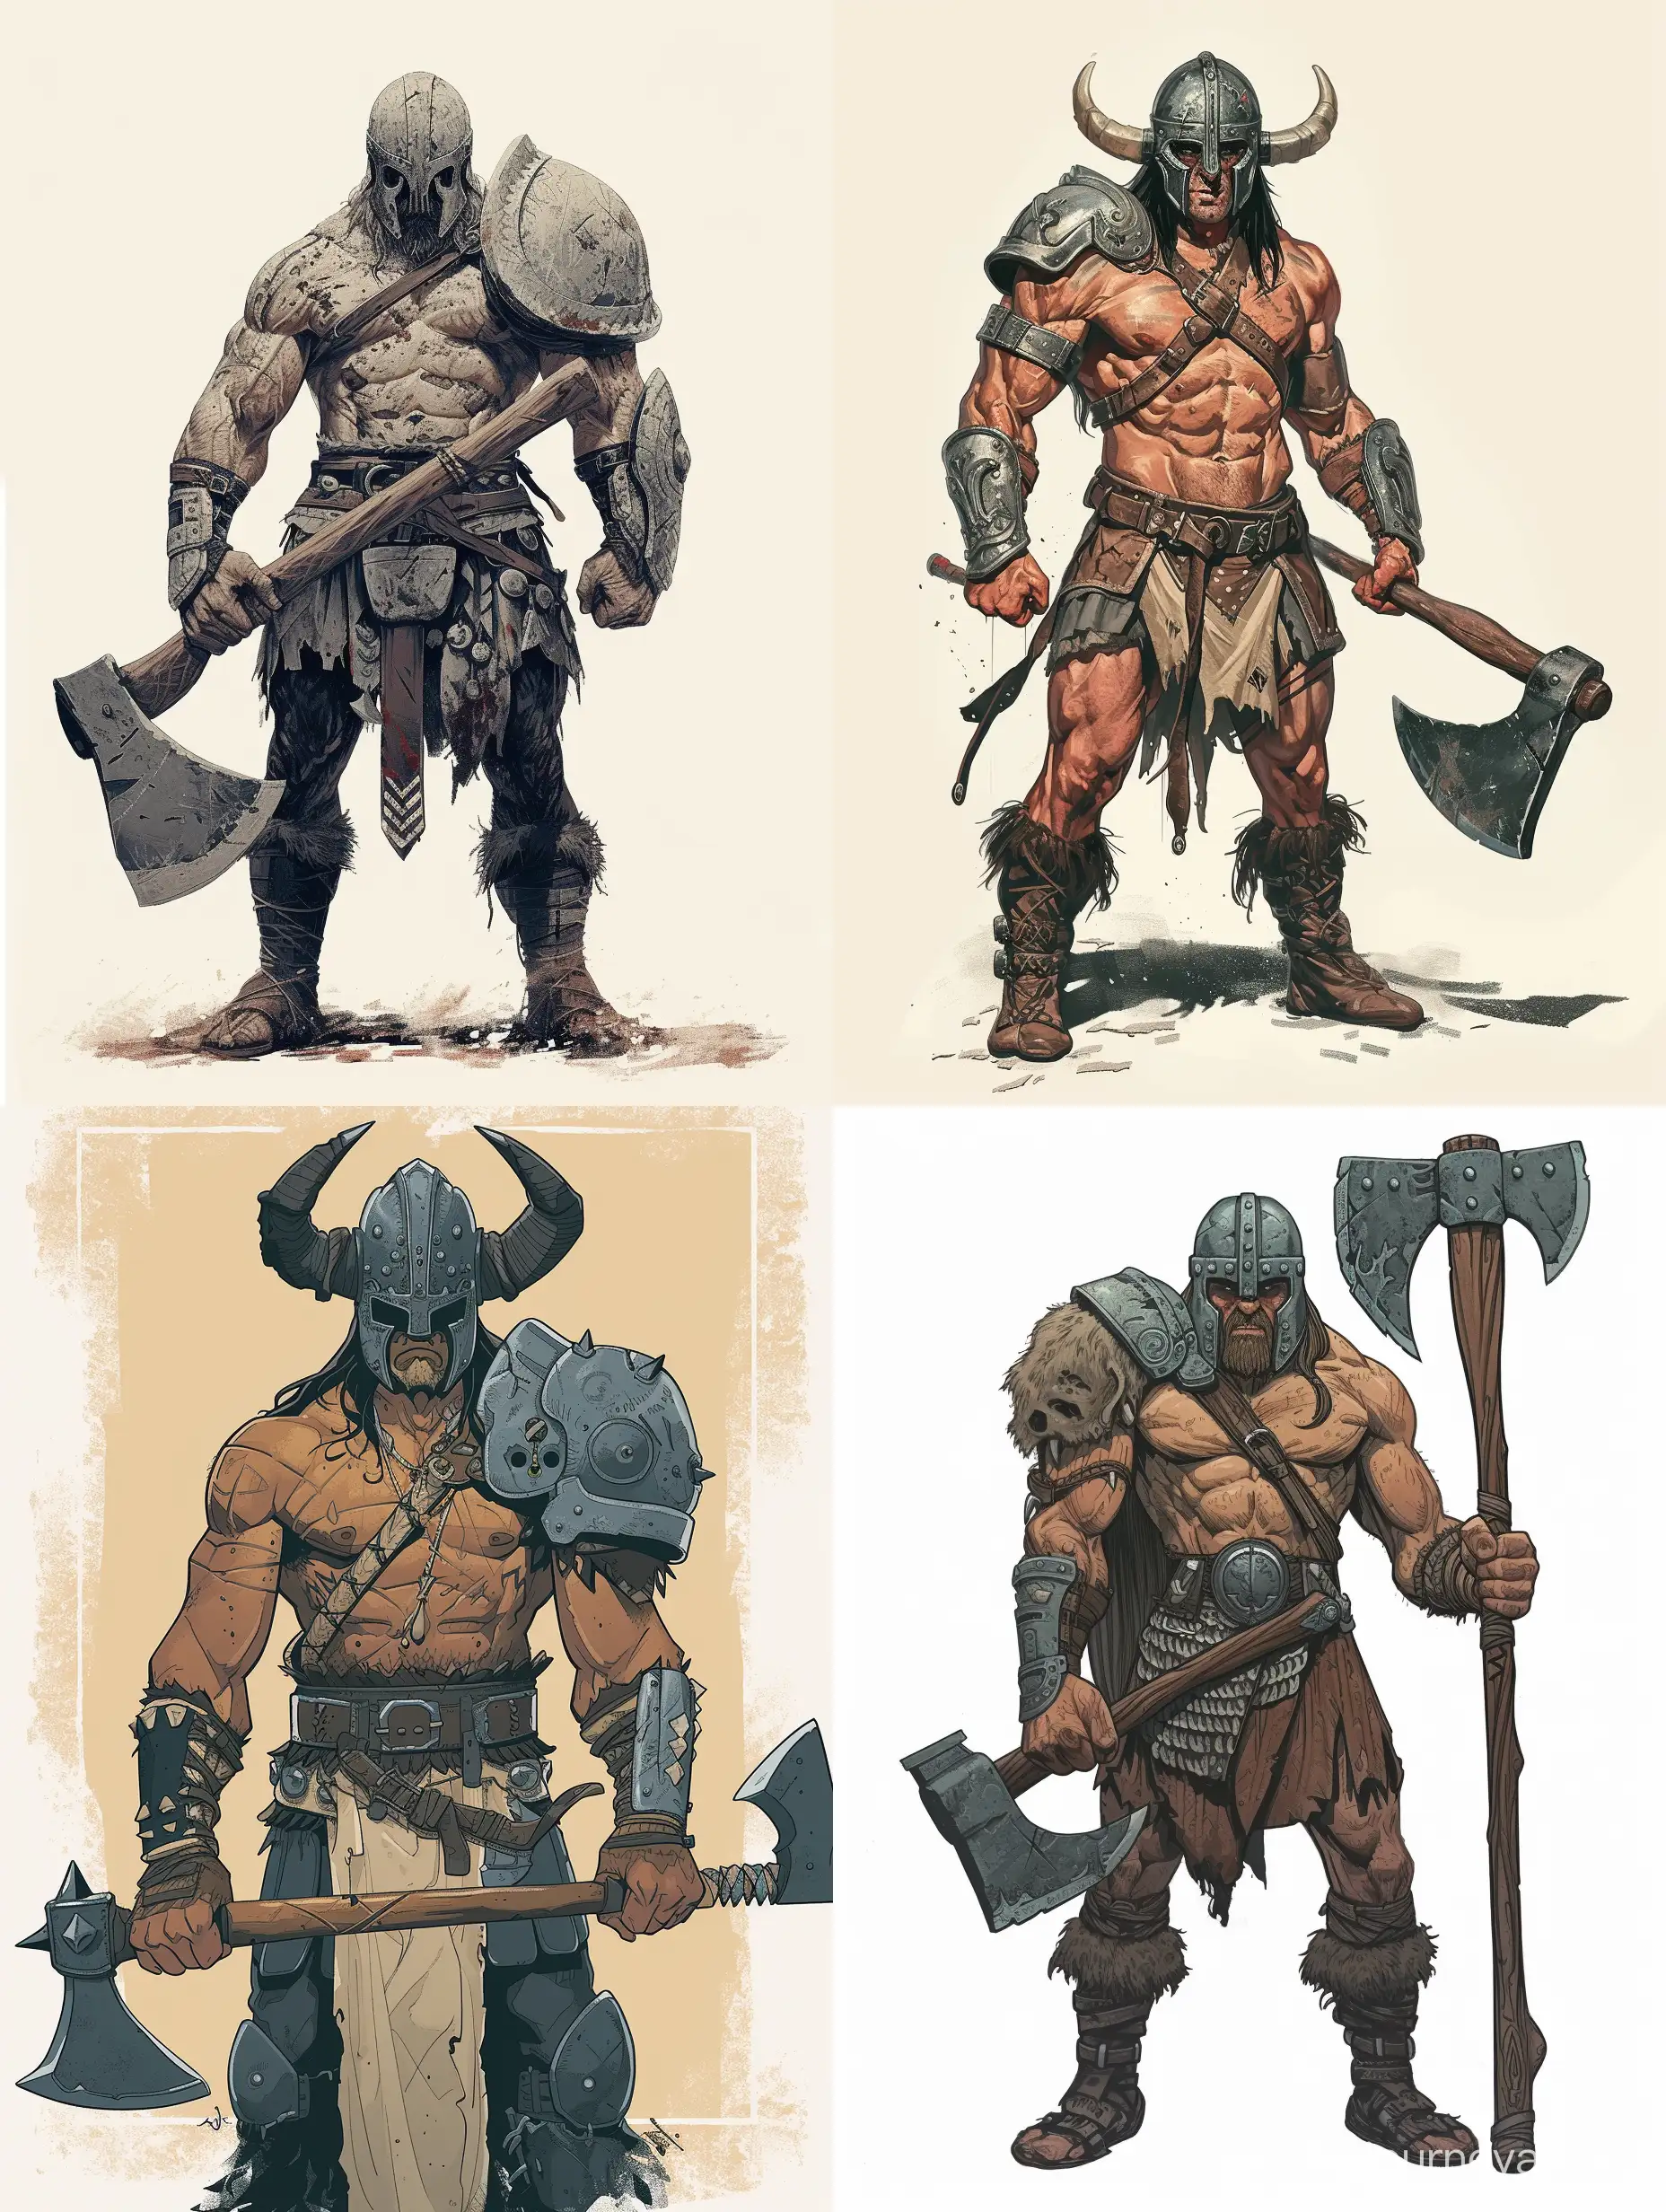 Fierce-Barbarian-Warrior-with-Giant-Axe